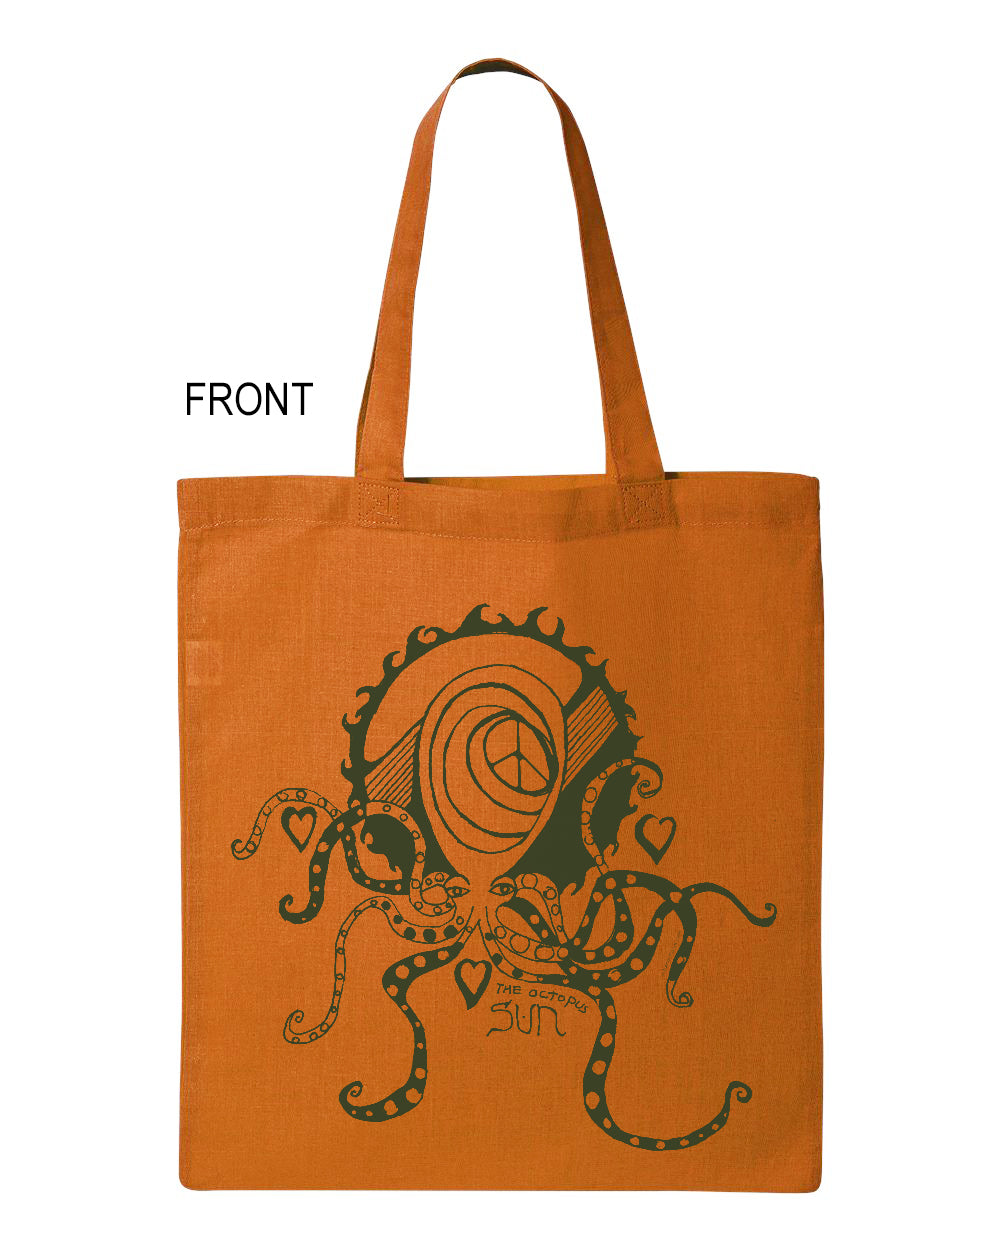 "The Octopus Sun" Tote canvas bag